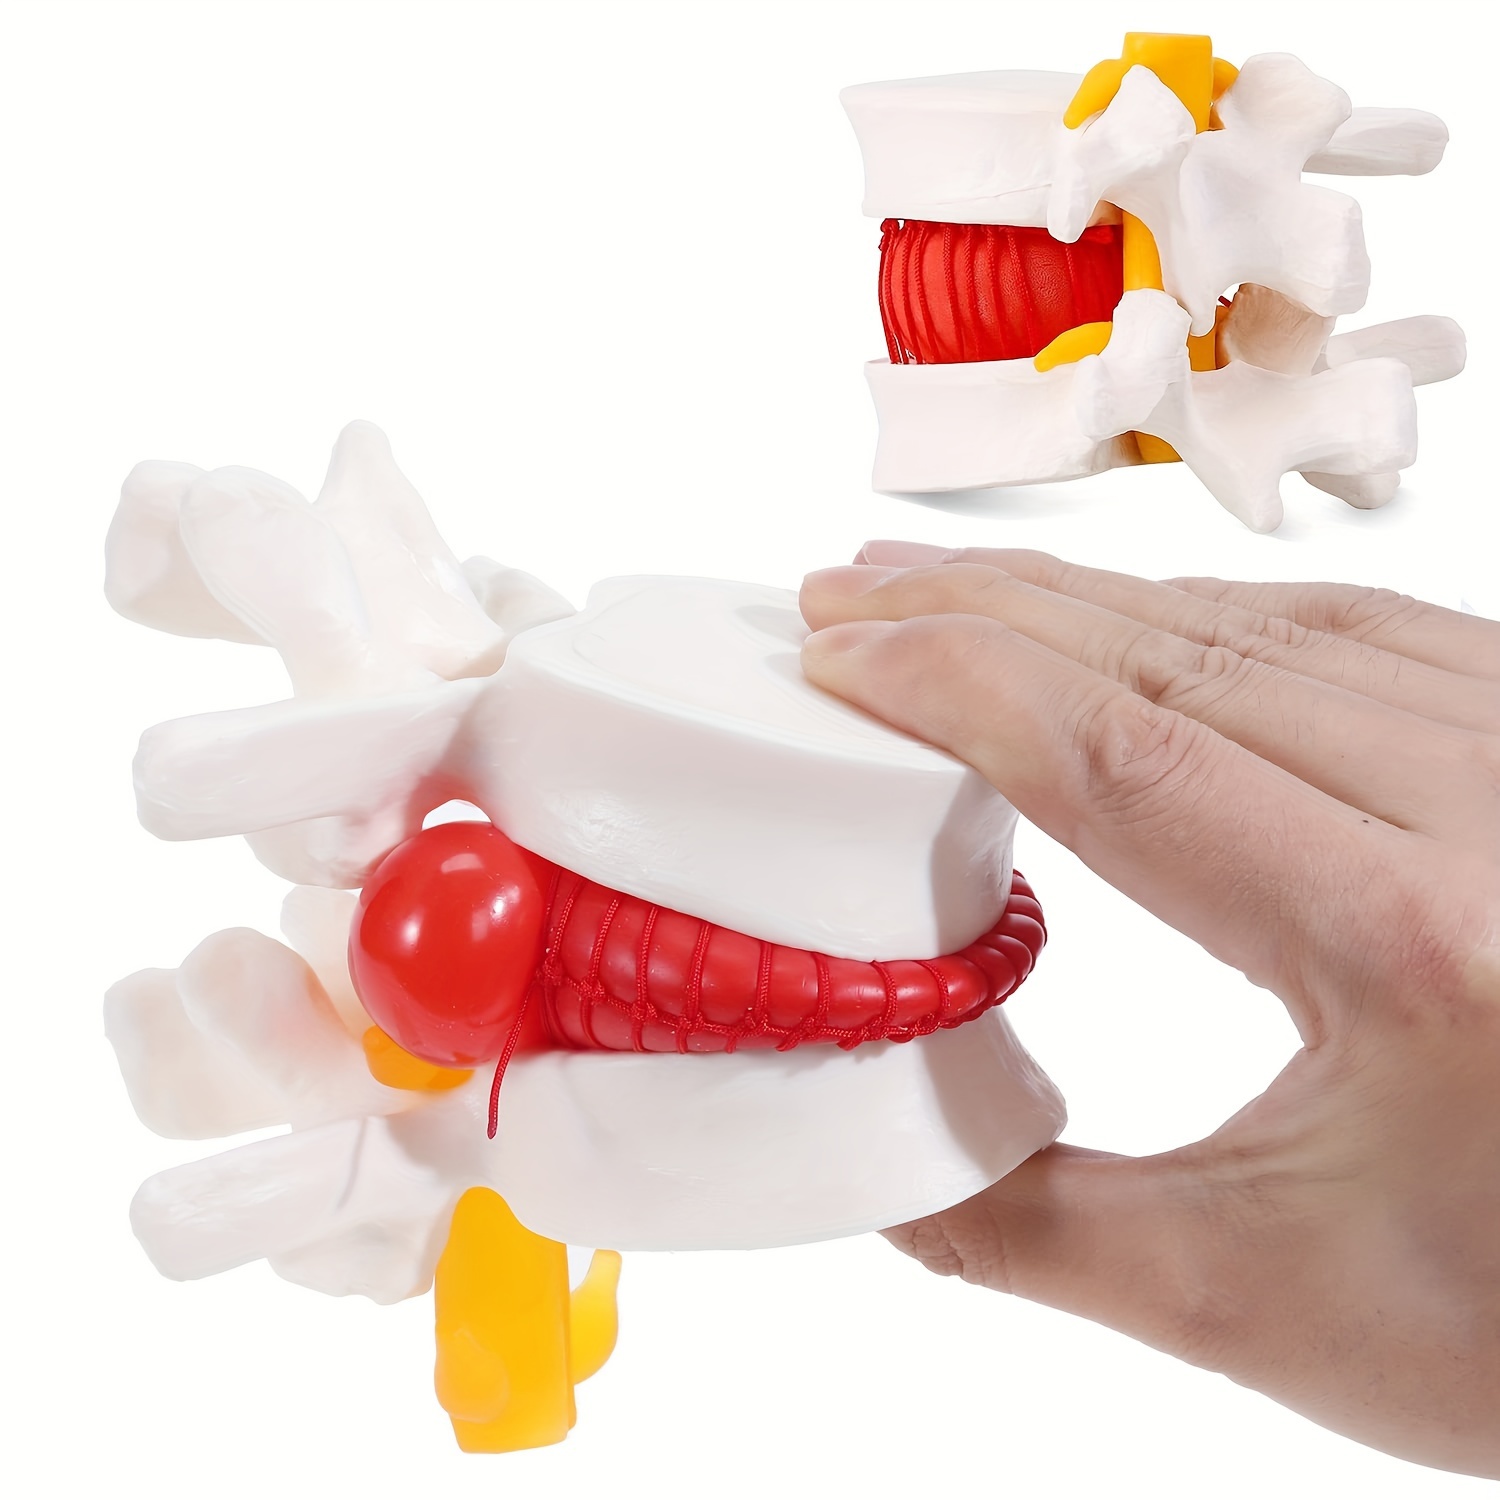 

Human Anatomical Lumbar Disc Herniation Model White- Lumbar Spine Model For Teaching & Learning - Excellent Way For Demonstrating Disc